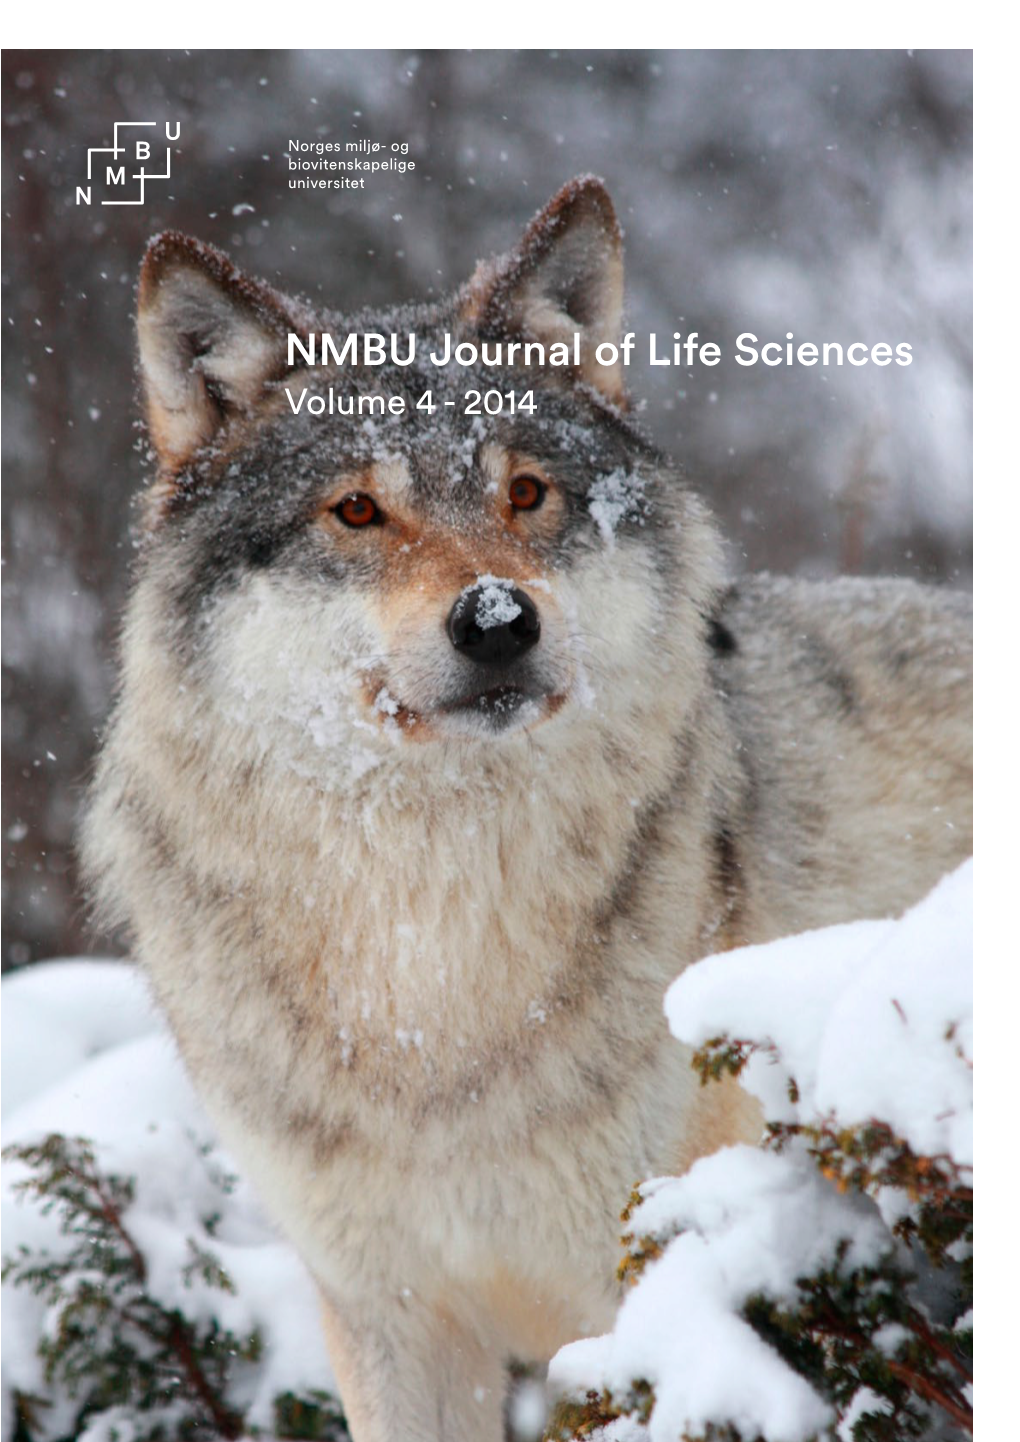 NMBU Journal of Life Sciences Volume 4 - 2014 Published by Norwegian University of Life Sciences